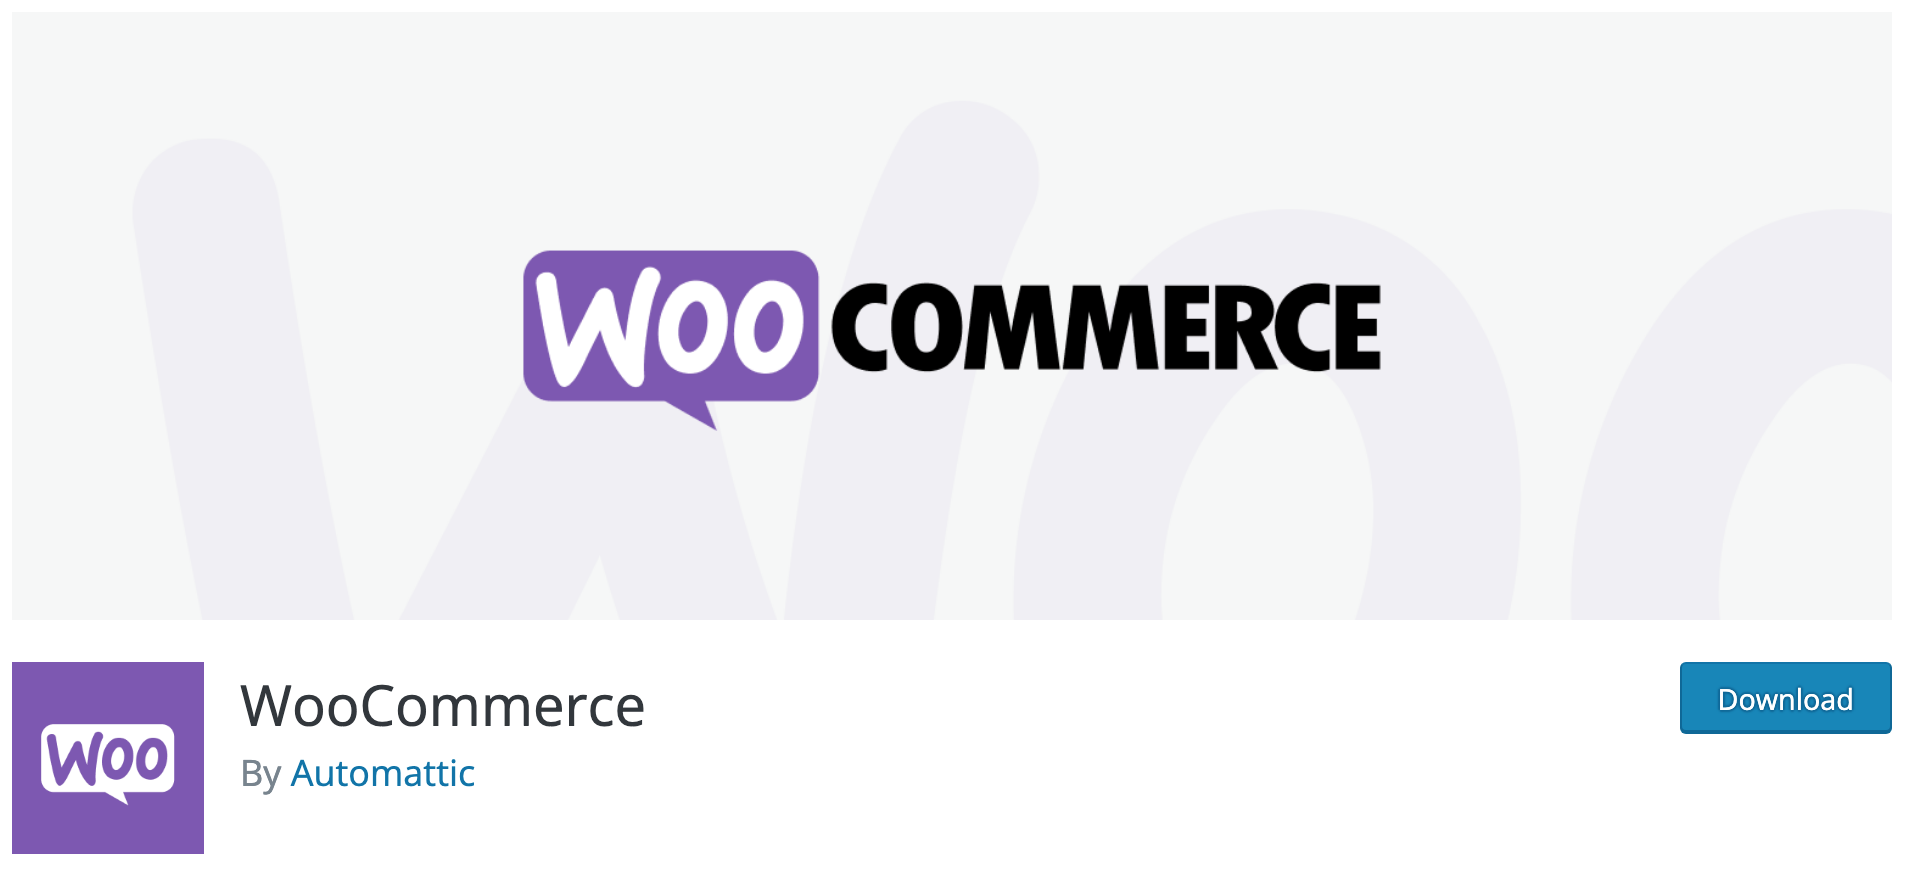 The Ultimate List of Plugins to Build a WooCommerce Store